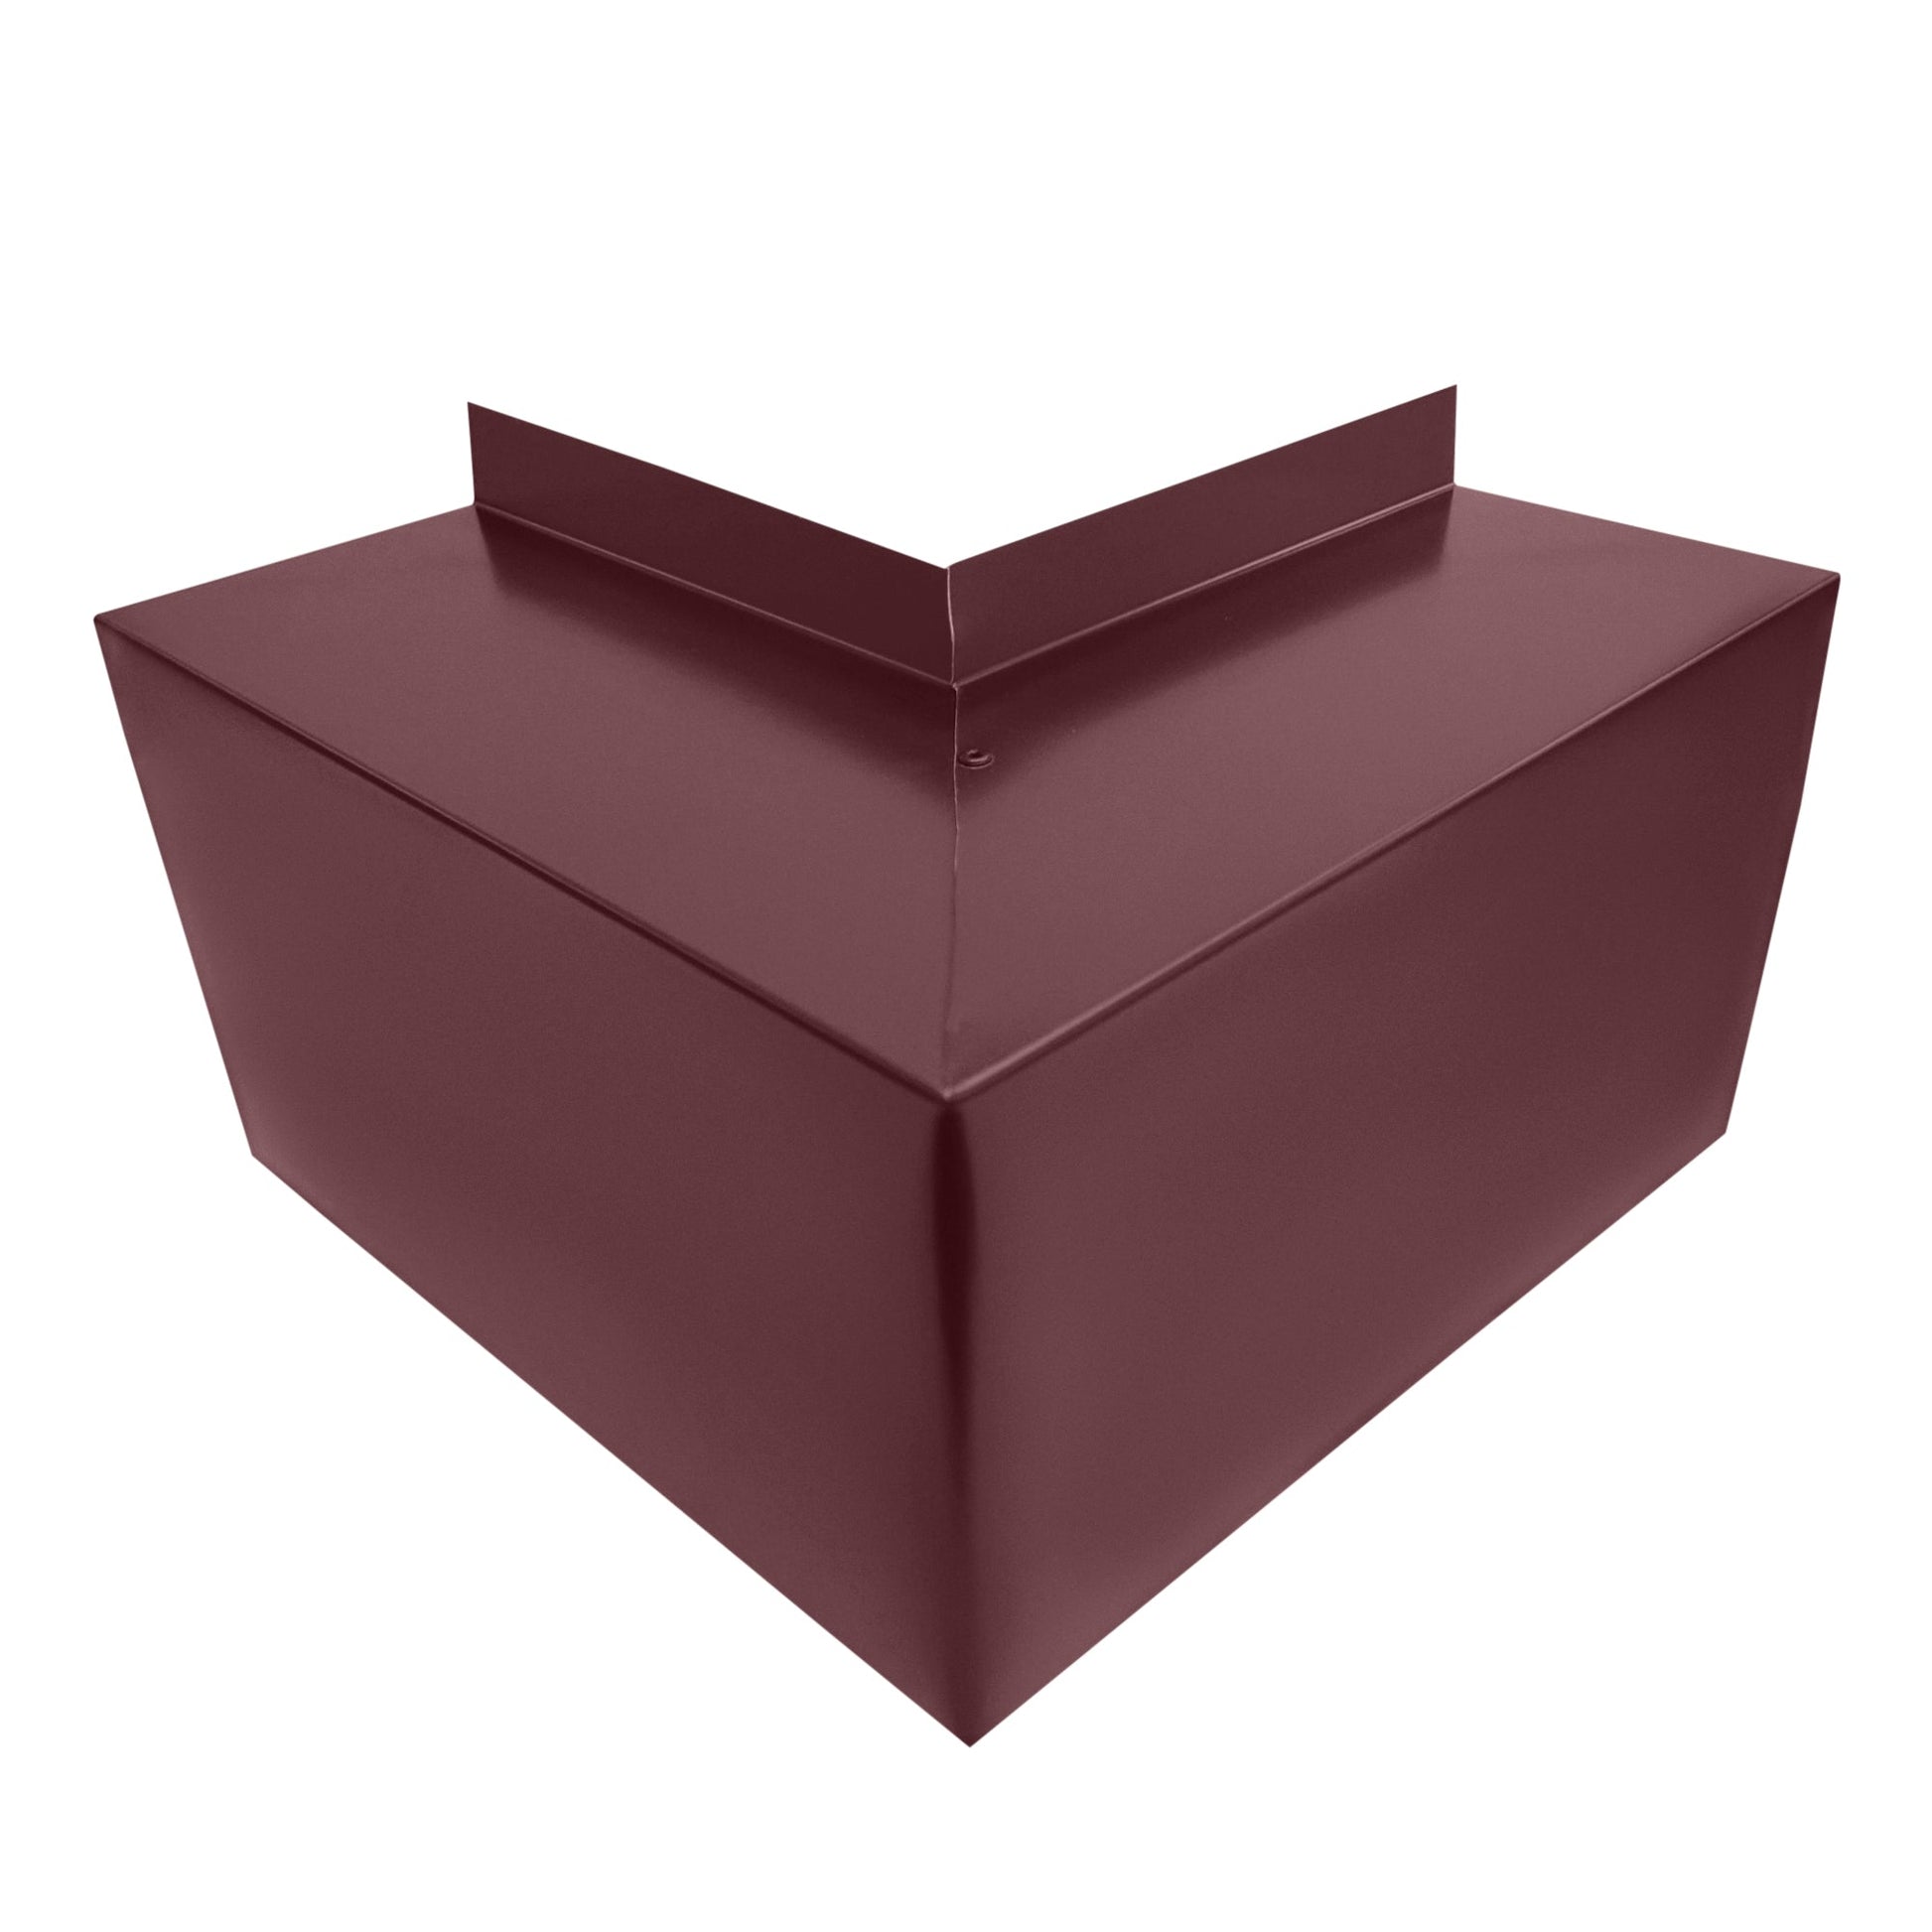 A maroon-colored, V-shaped metal object with clean lines and smooth surfaces, designed for simple and easy installation over a right-angle corner. This Perma Cover Residential Series - Line Set Cover Outside Corner Elbows - Premium Quality features a triangular front surface and an extended narrow strip along the top edge, perfect for an HVAC line set cover.